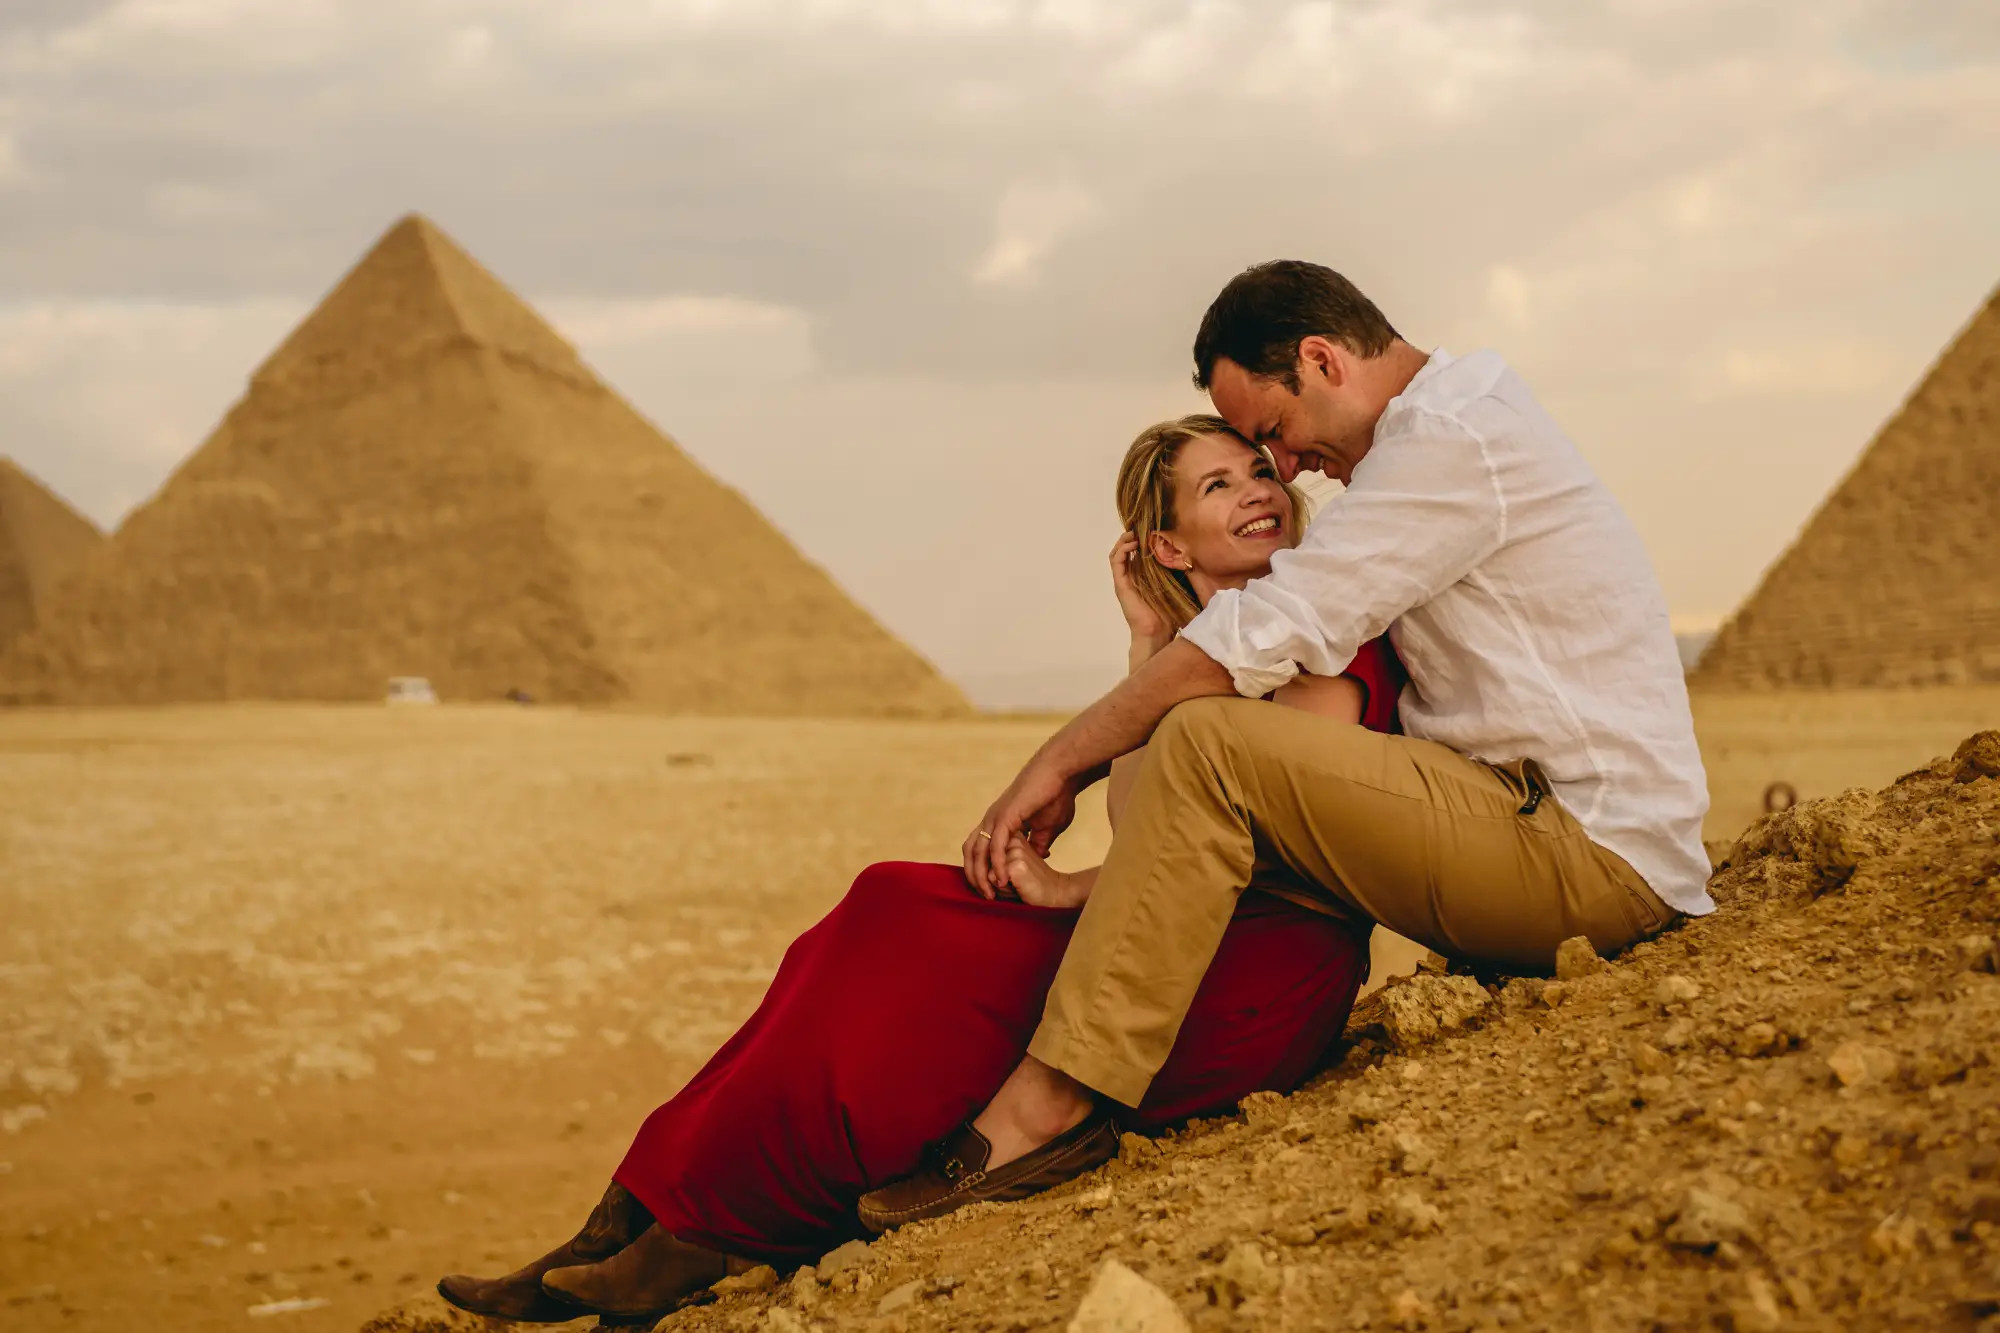 Couple's photoshoot by Amir, Localgrapher in Cairo